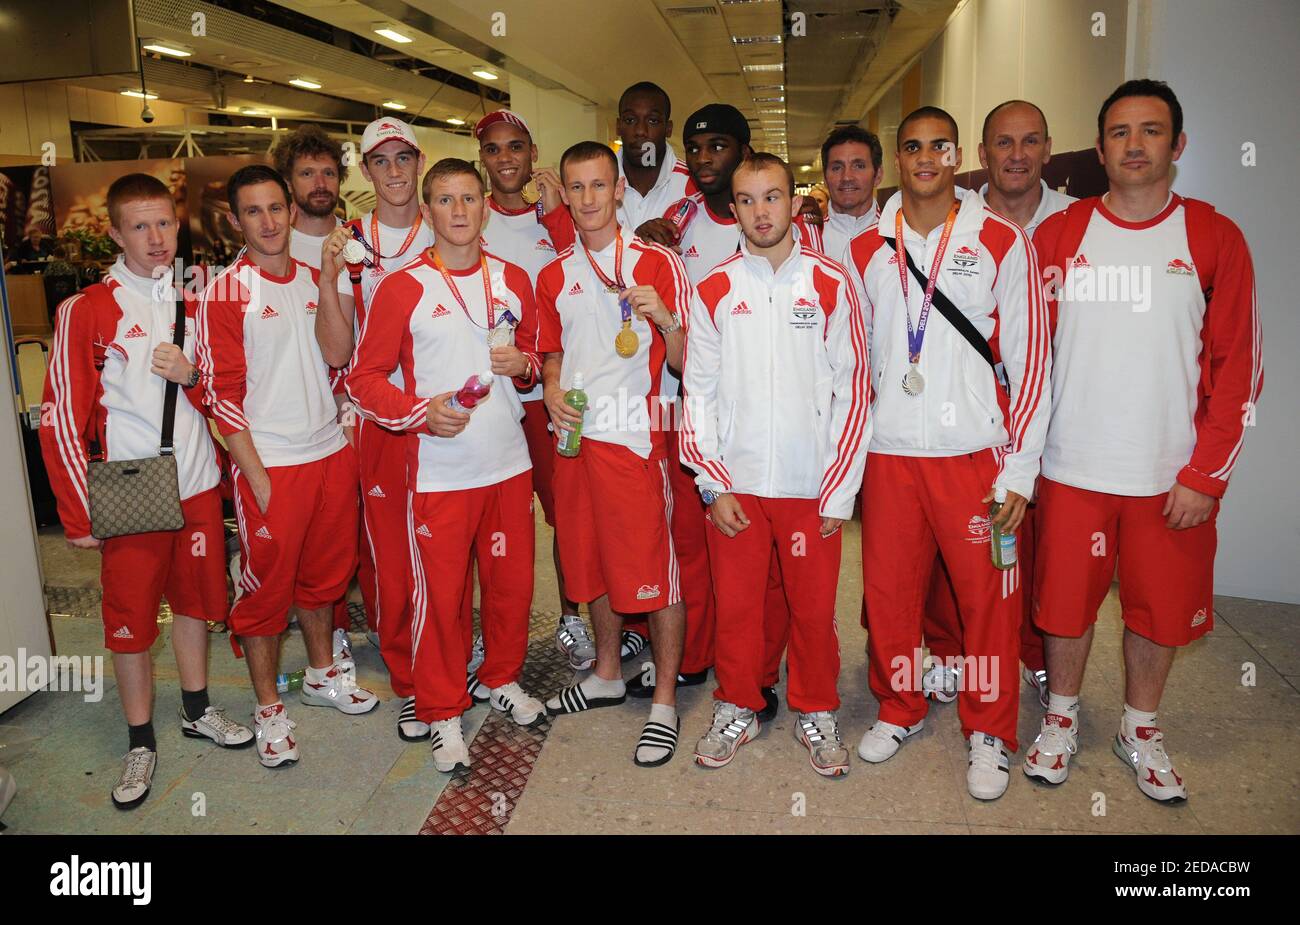 Commonwealth Games - England Boxing Team Arrive Back From Delhi - Heathrow - 15/10/10  England's Boxing Team on their arrival at Heathrow Airport  Mandatory Credit: Action Images / Henry Browne  Livepic Stock Photo